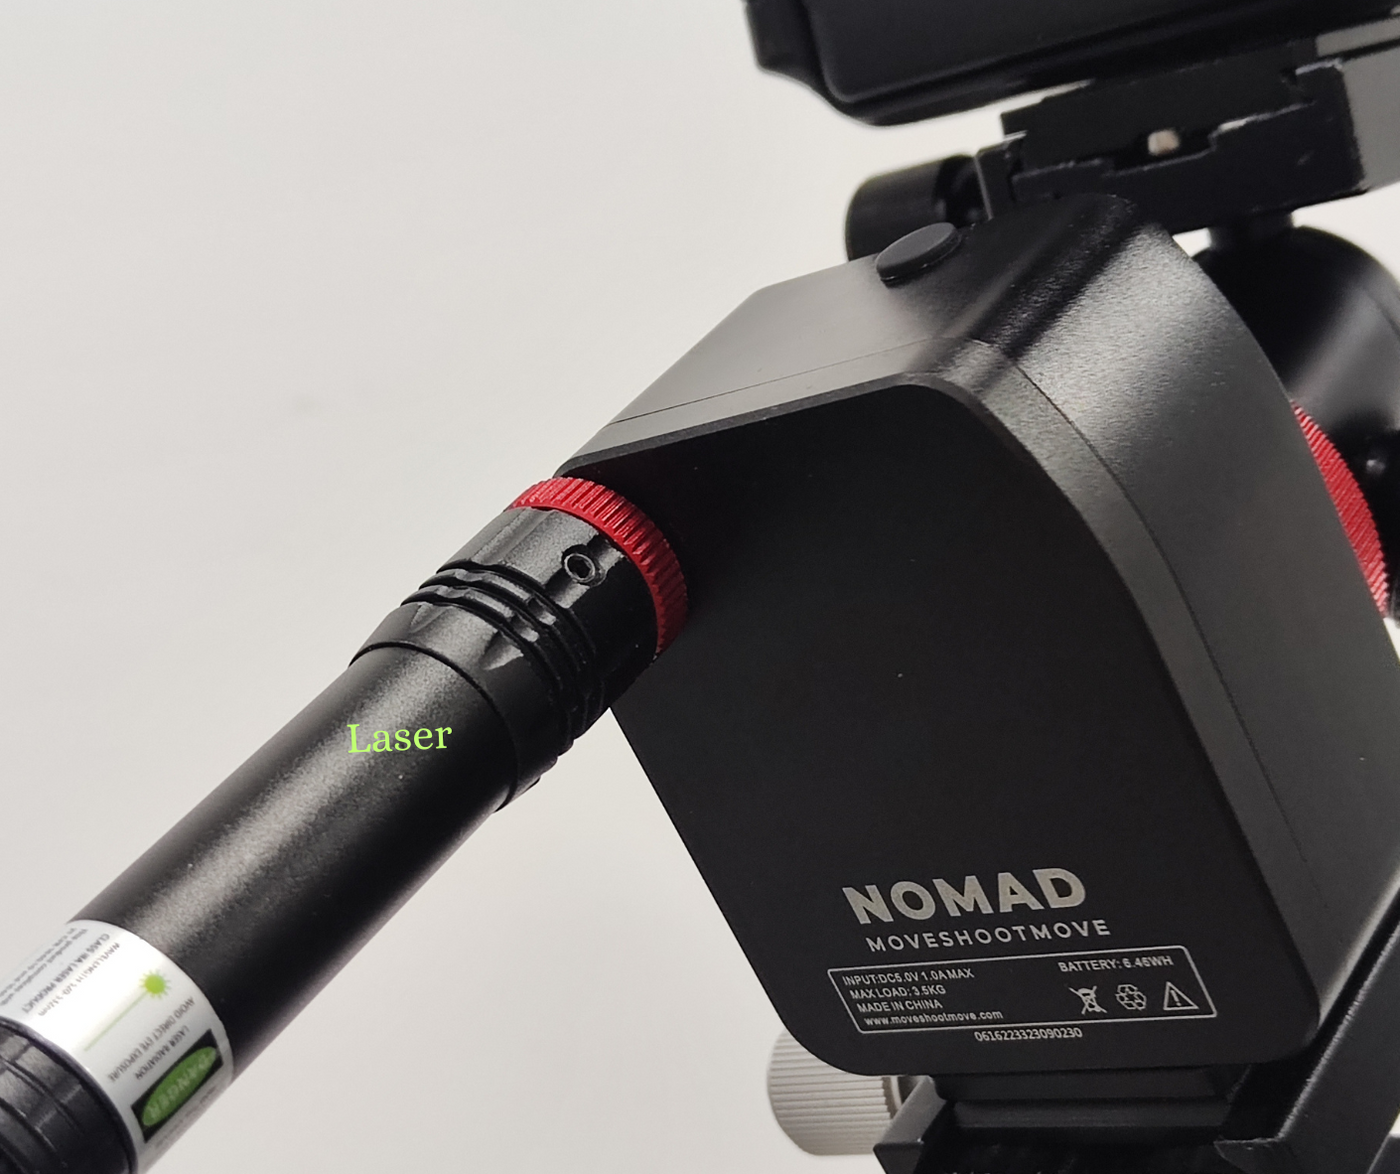 NOMAD star tracker for Novice and Experienced Astrophotographers- The best gift for you and your loved ones 🎁